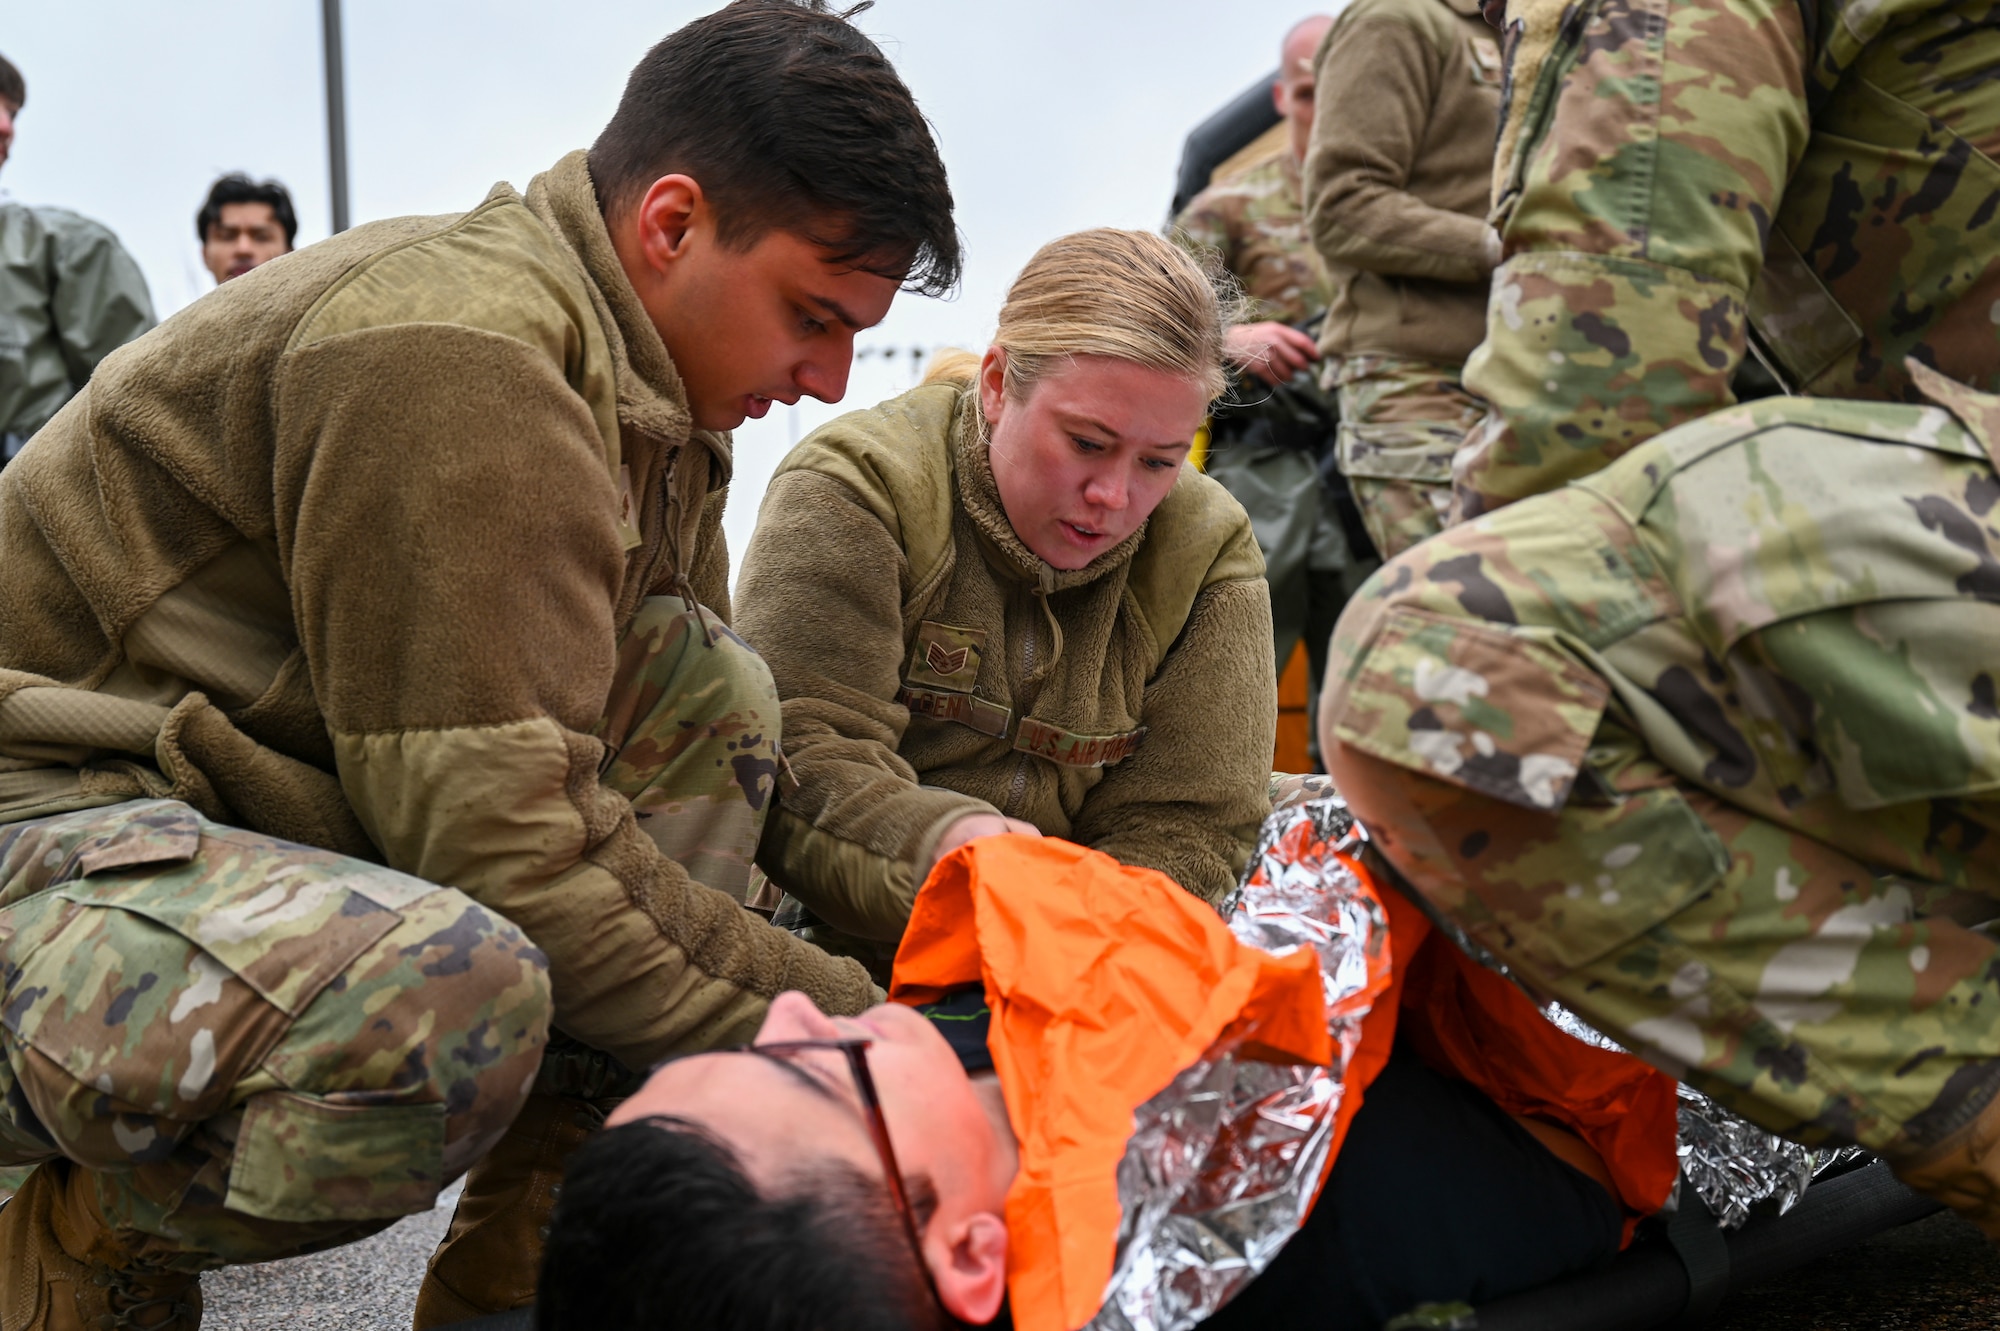 Airmen from the 341st Medical Group prepare to transport a simulated casualty during Ready EAGLE II, a training exercise held biennially at Malmstrom Air Force Base, Mont., Sept. 21, 2023. The training included a response to a chemical, biological, radiological and nuclear disaster allowing the medics to train their triage, decontamination, treatment and patient tracking skills on roughly 60 volunteer actors. (U.S. Air Force photo by Senior Airman Breanna Christopher Volkmar)